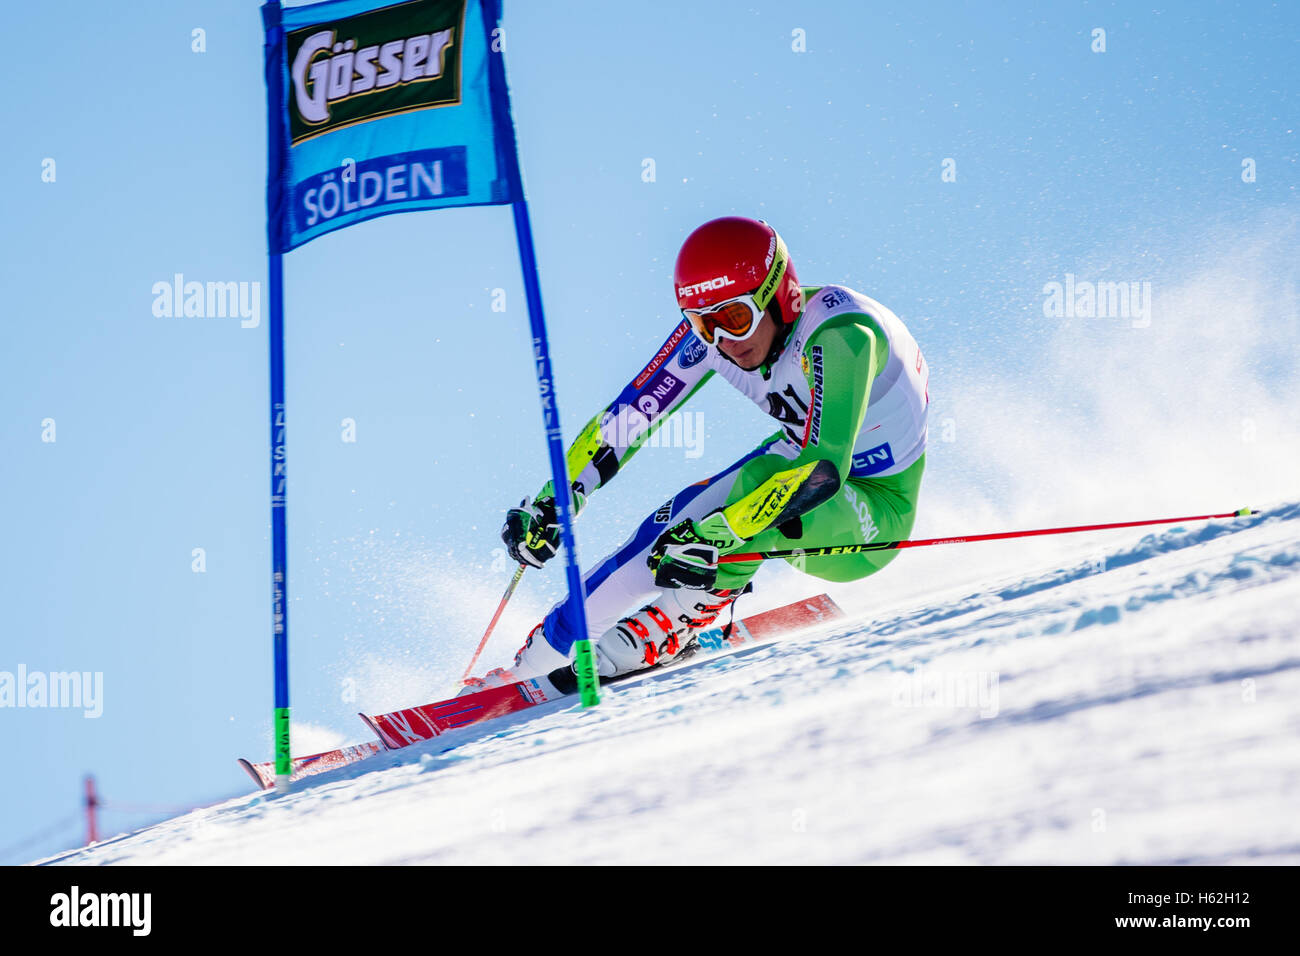 Solden, Austria. 23rd Oct, 2016. Zan Kranjec of Slovenia competes during the first run of the FIS World Cup Men's Giant Slalom race in Solden, Austria on October 23, 2016. Credit:  Jure Makovec/Alamy Live News Stock Photo